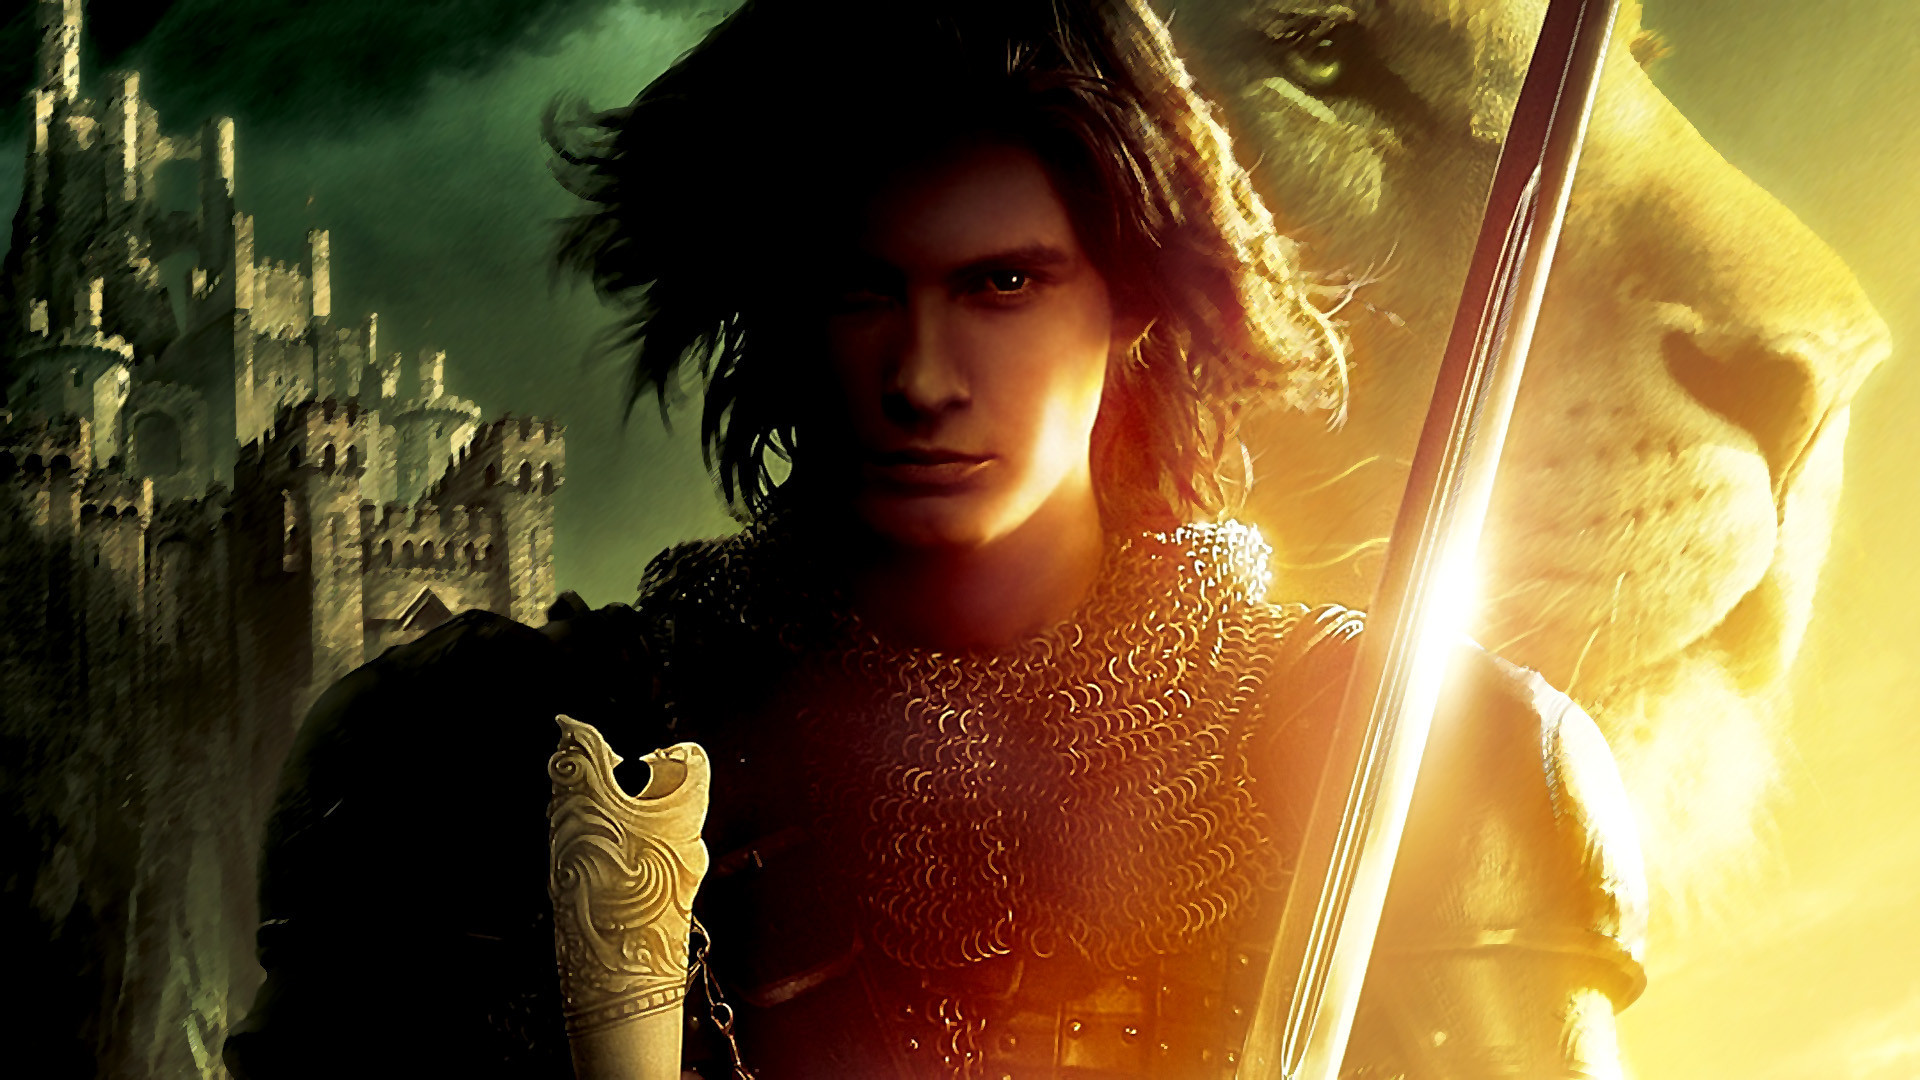 movie, the chronicles of narnia: prince caspian